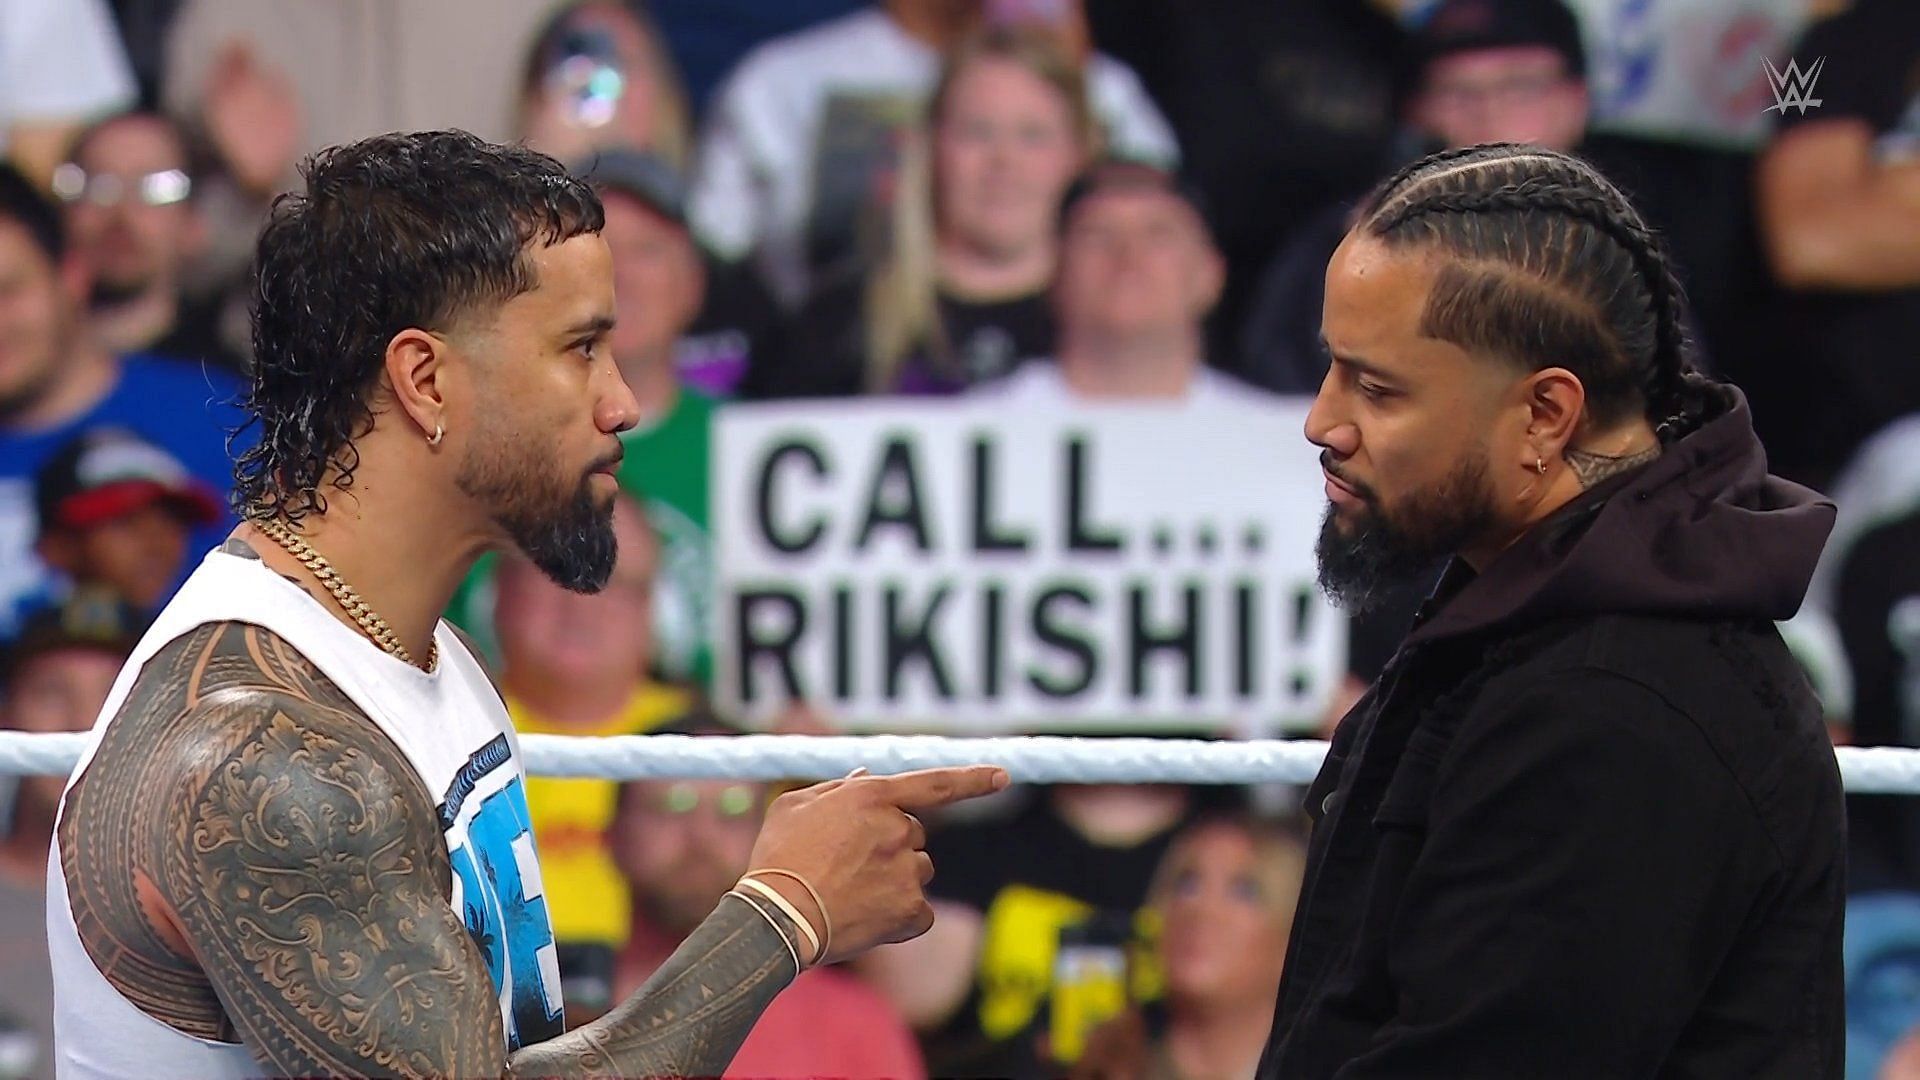 The Bloodline confronted Jimmy Uso on WWE RAW